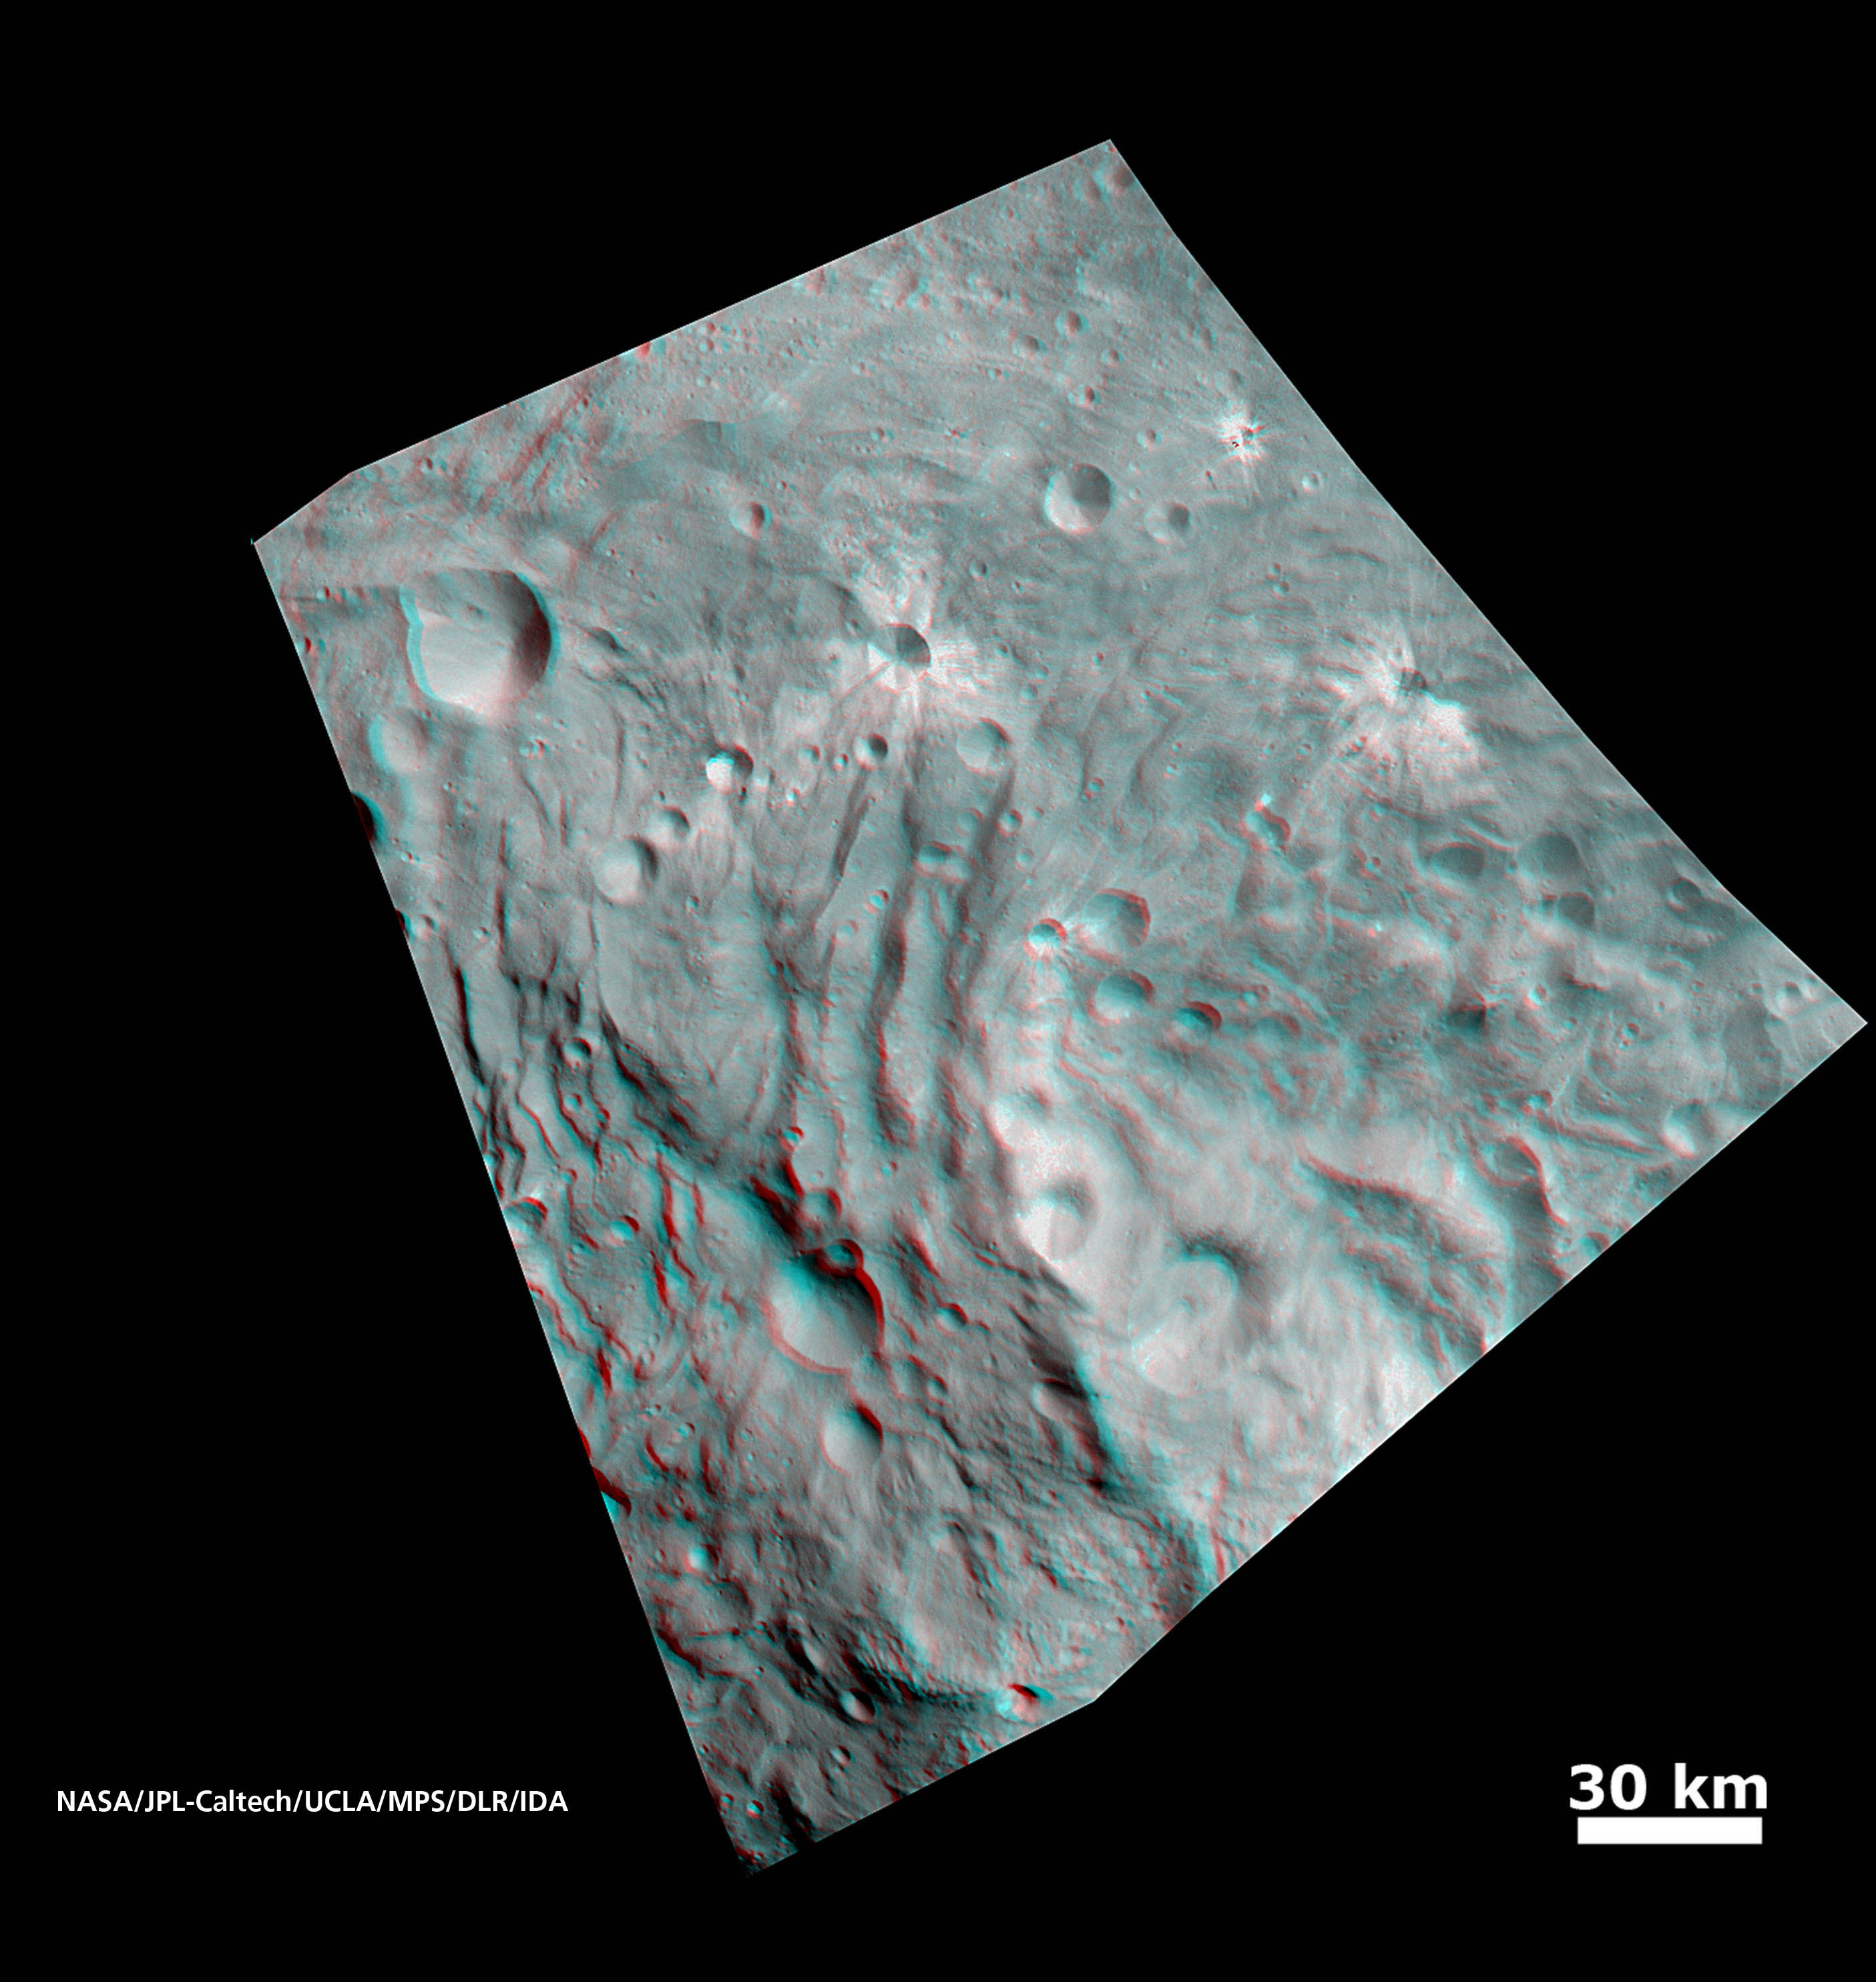 Vesta's Surface in 3-D: Details of Wave-Like Terrain in the South Pole